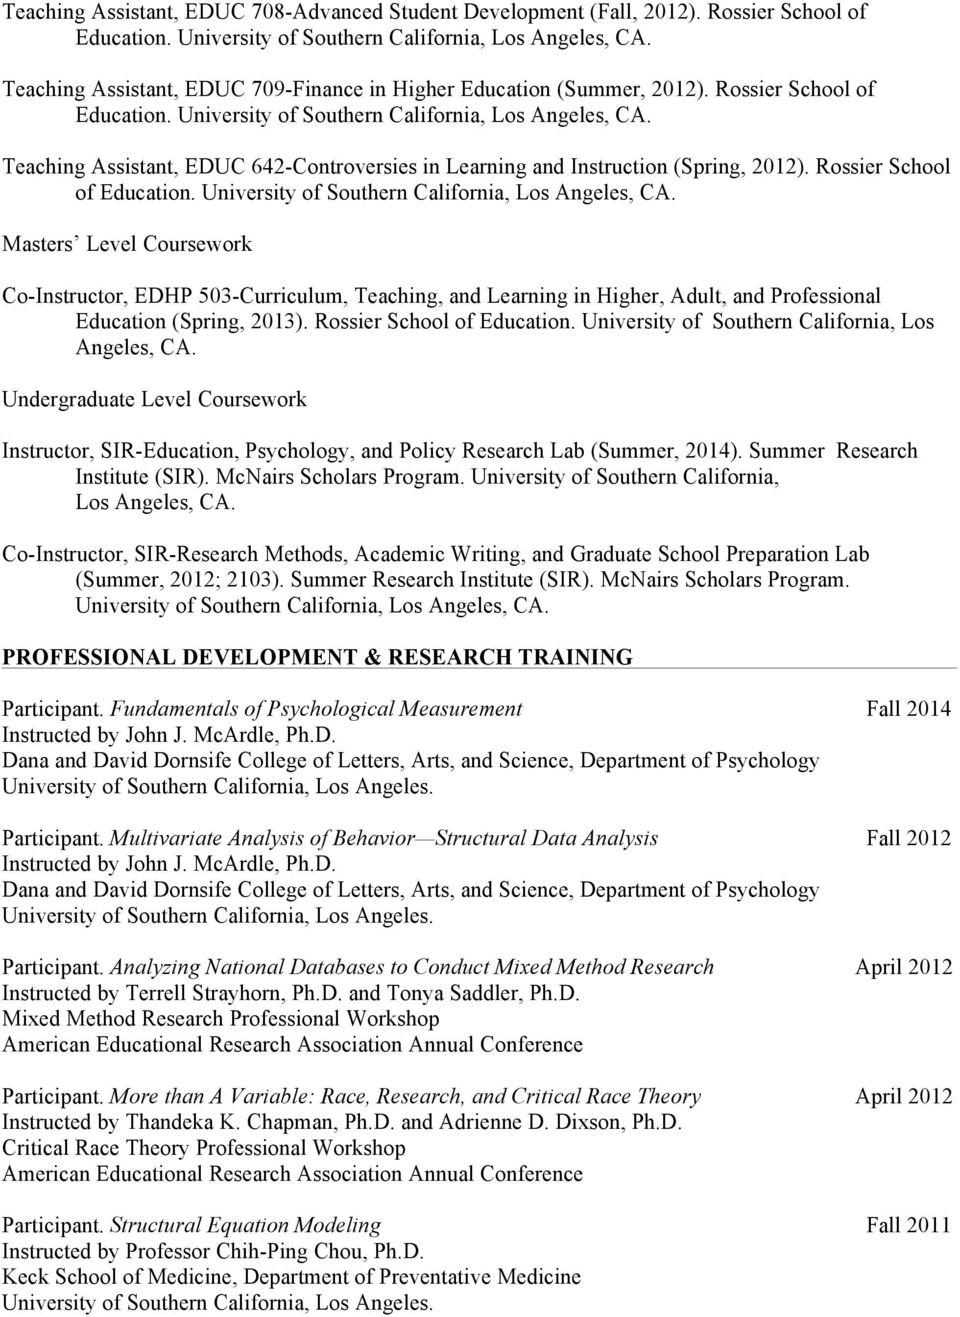 Rossier School of Education., Los Angeles, CA. Undergraduate Level Coursework Instructor, SIR-Education, Psychology, and Policy Research Lab (Summer, 2014). Summer Research Institute (SIR).